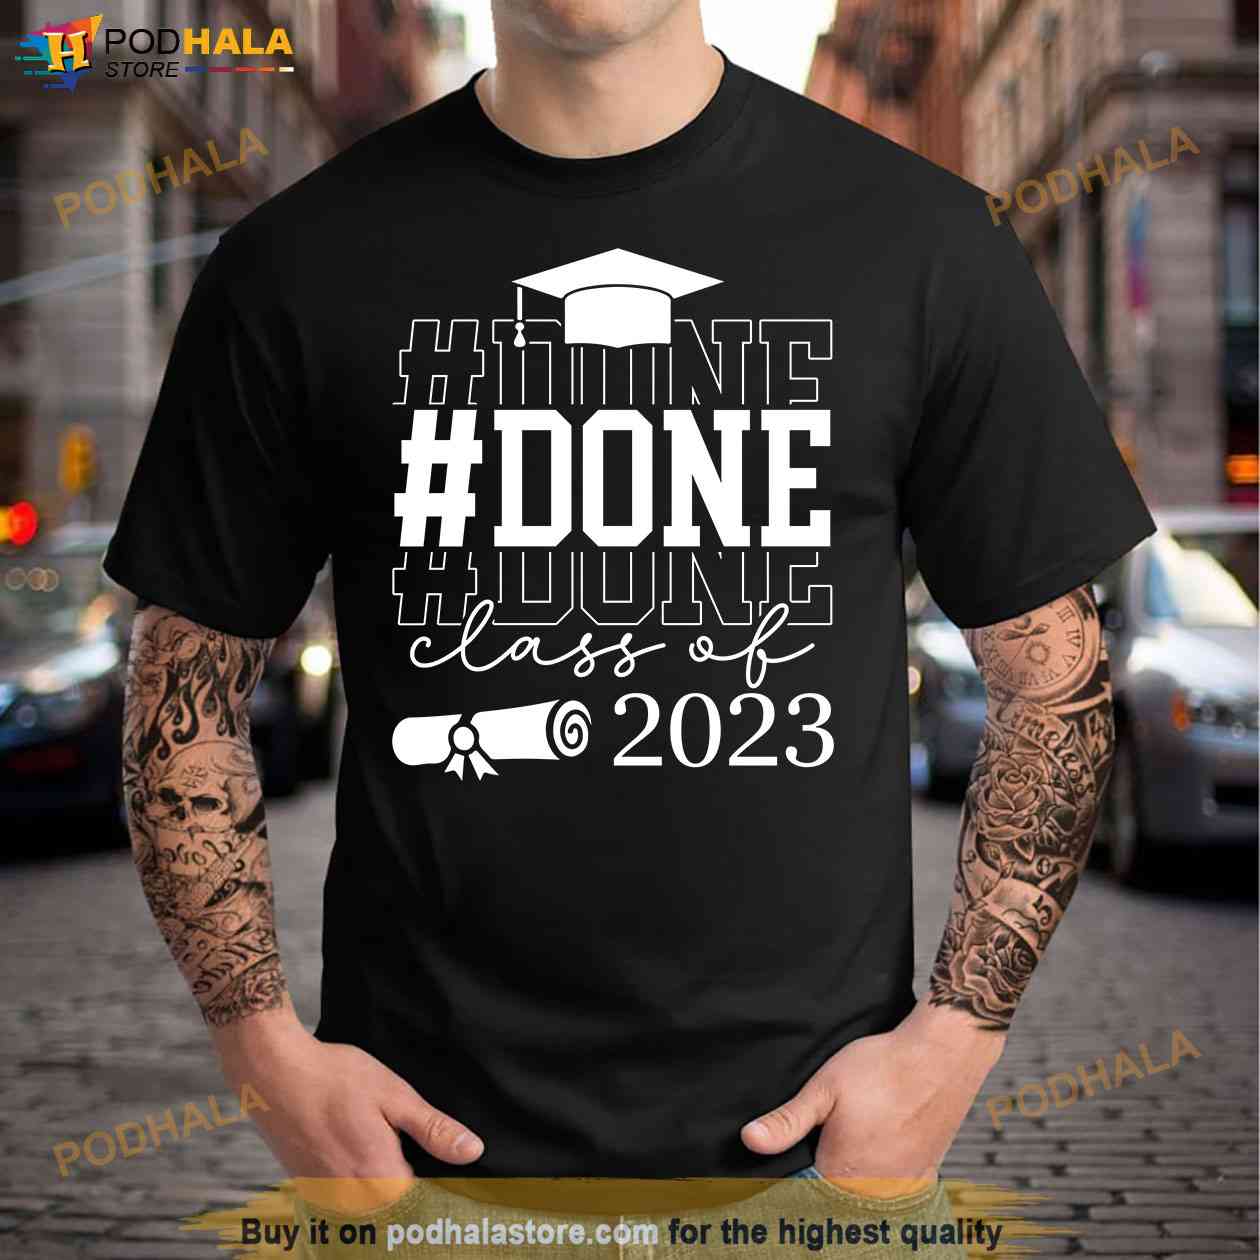 Proud Mom Of A Baseball Senior 2023 Graduate Graduation Shirt - Bring Your  Ideas, Thoughts And Imaginations Into Reality Today